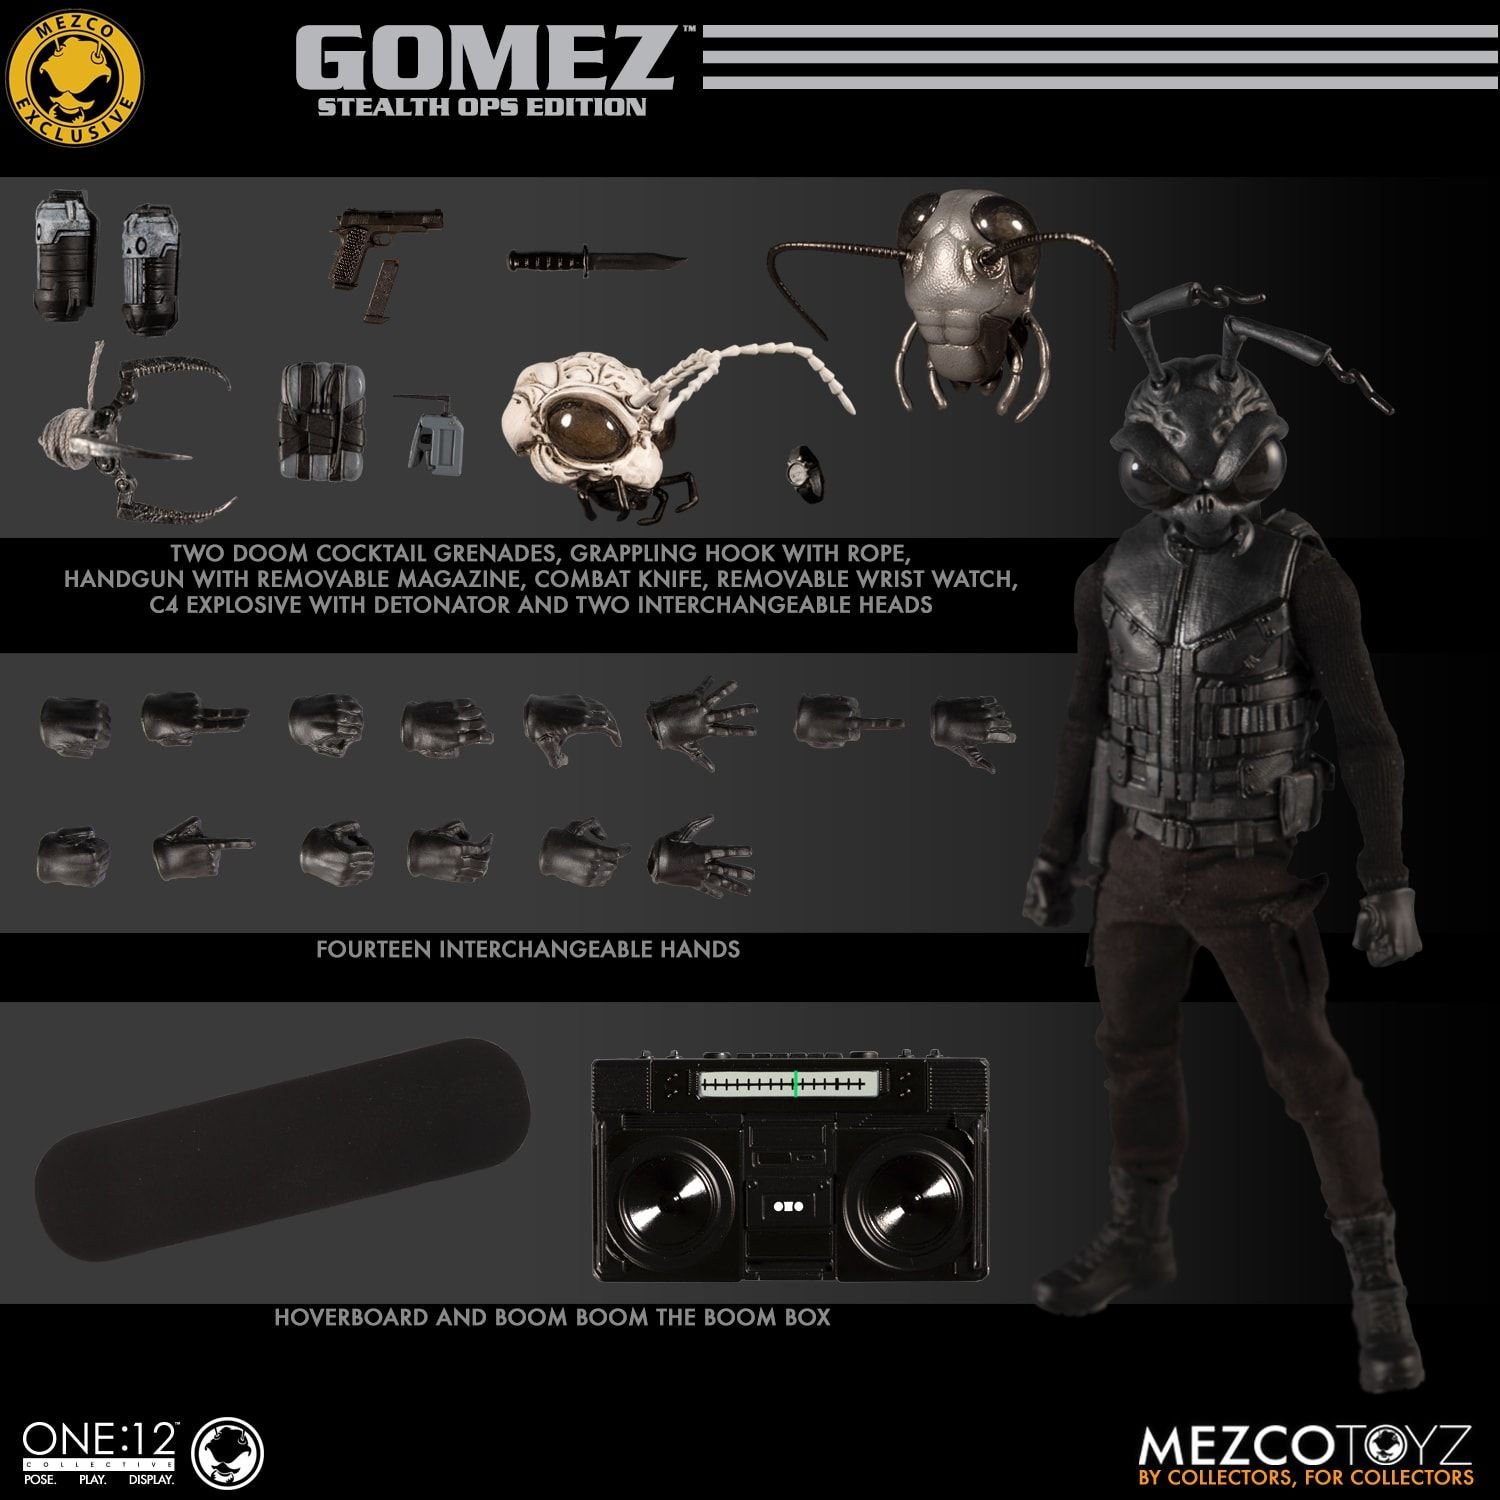 One:12 Collective Gomez - Stealth Ops Edition | Mezco Toyz